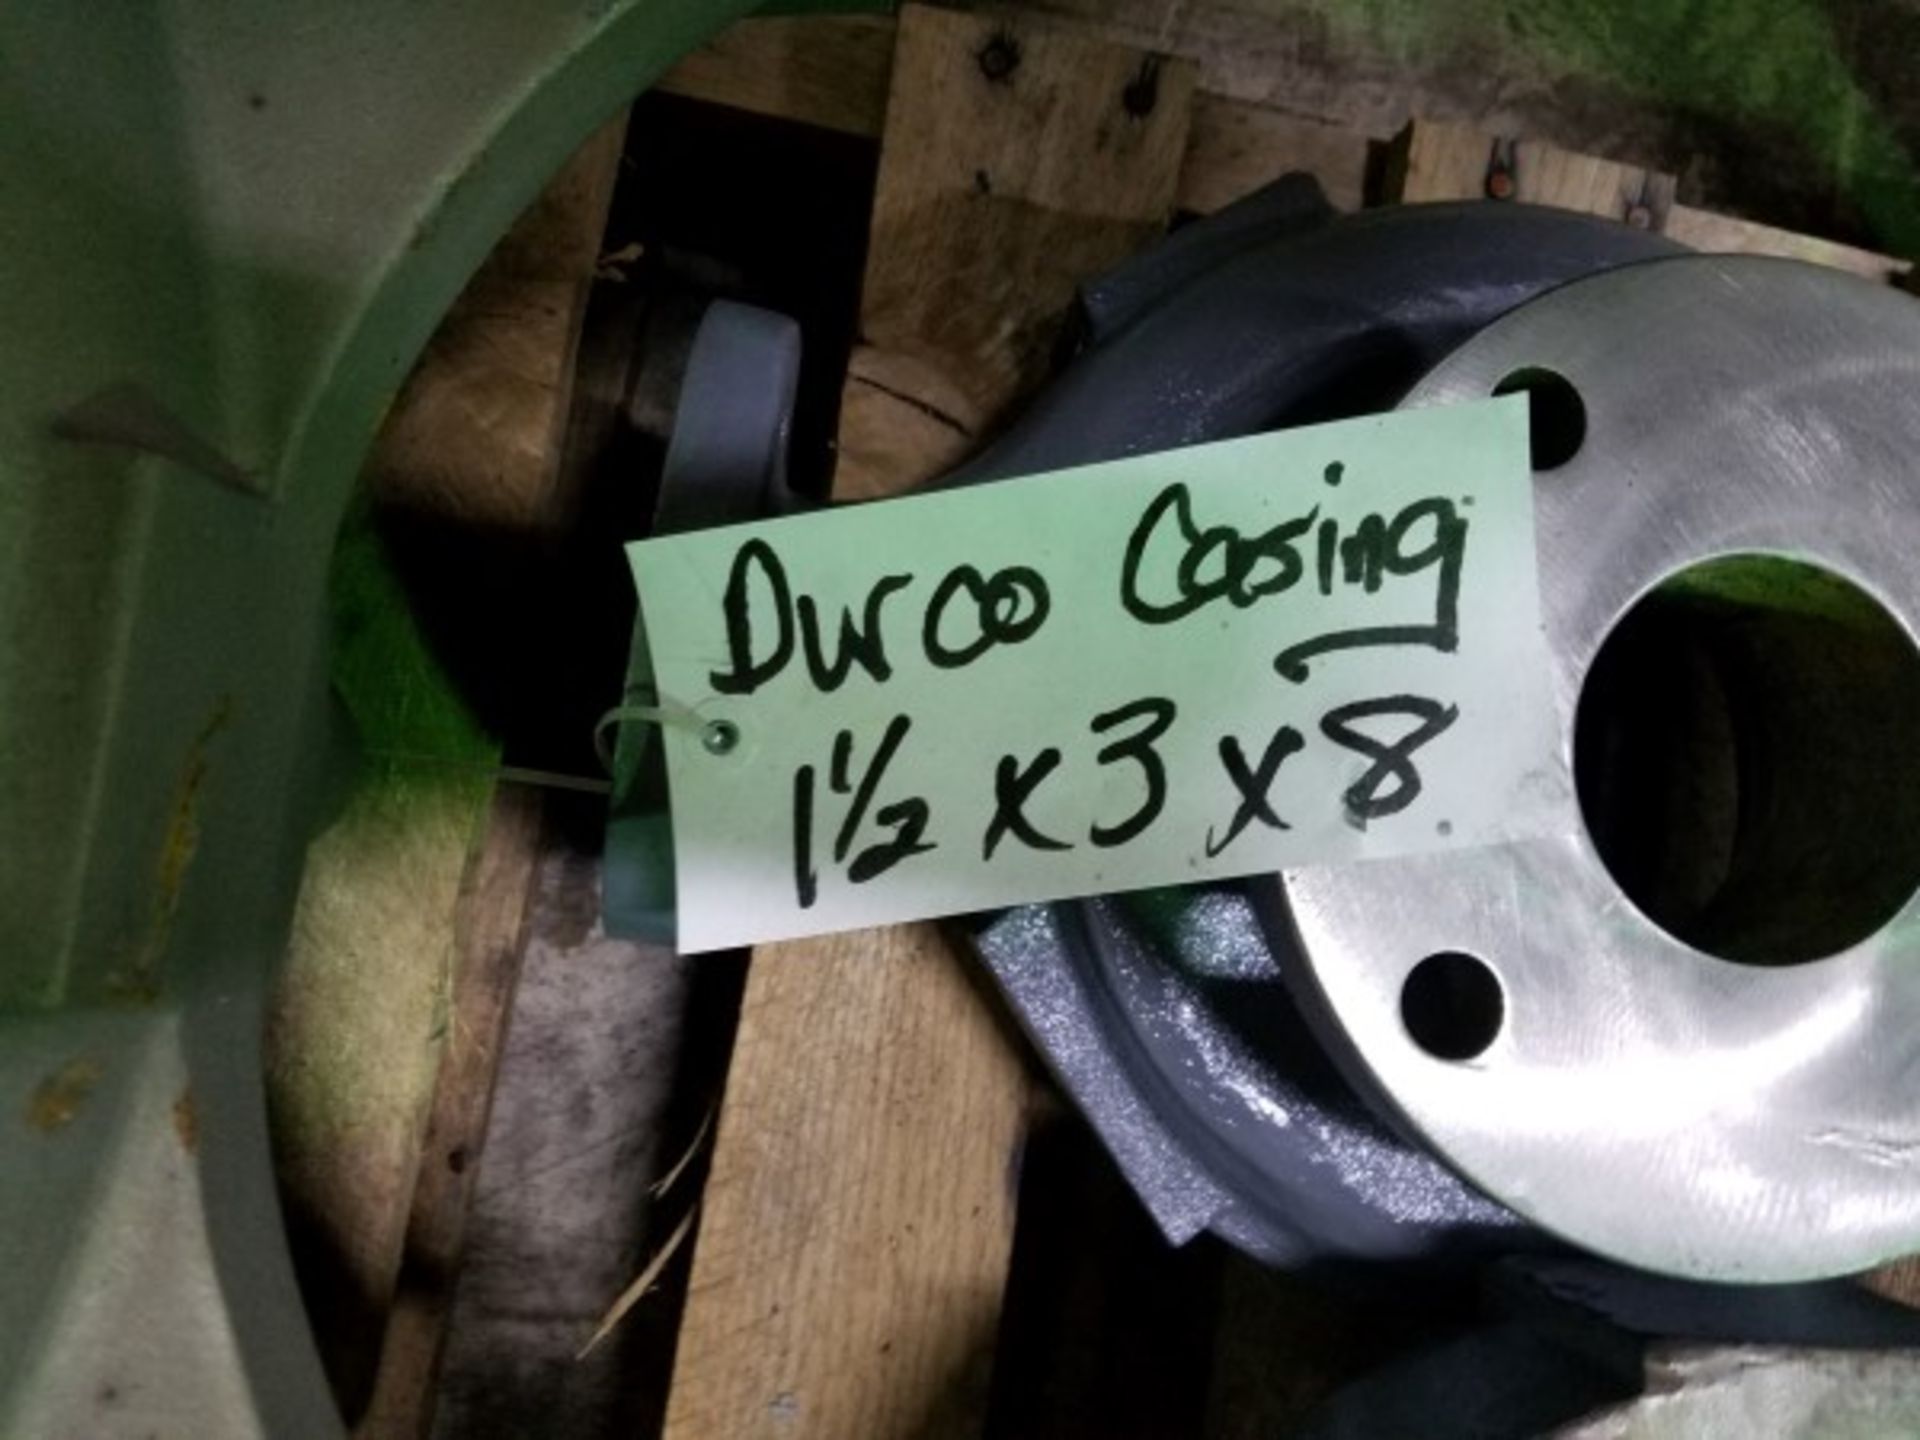 Durco 1.5 x 3 x 8 Casing | Seller to load for $10 per lot or buyers may remove hand carry items by - Image 2 of 2